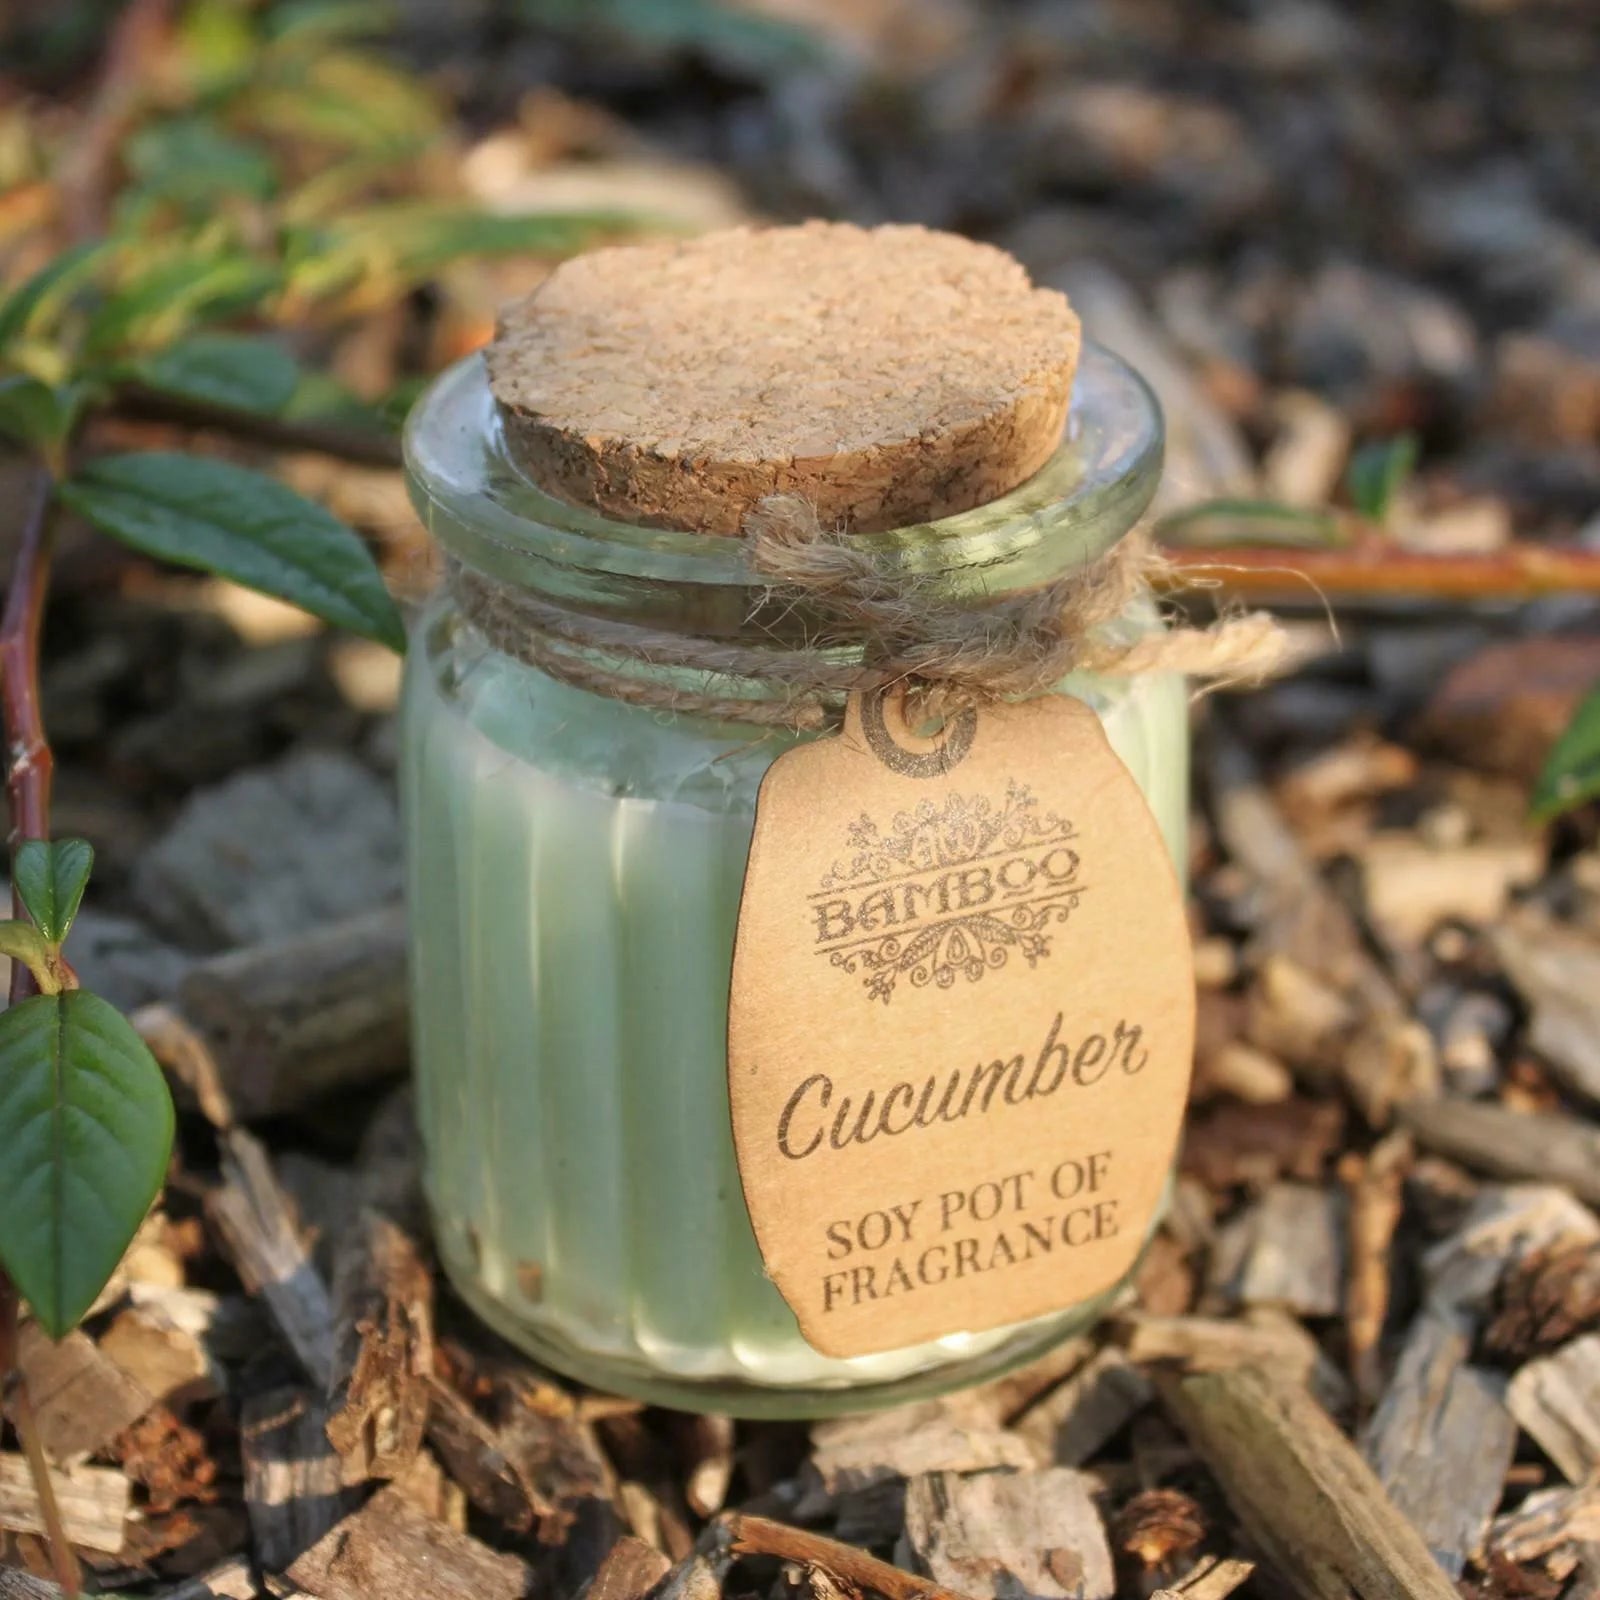 Cucumber Soy Pot Of Fragrance Candles - Ancient Wisdom - 2